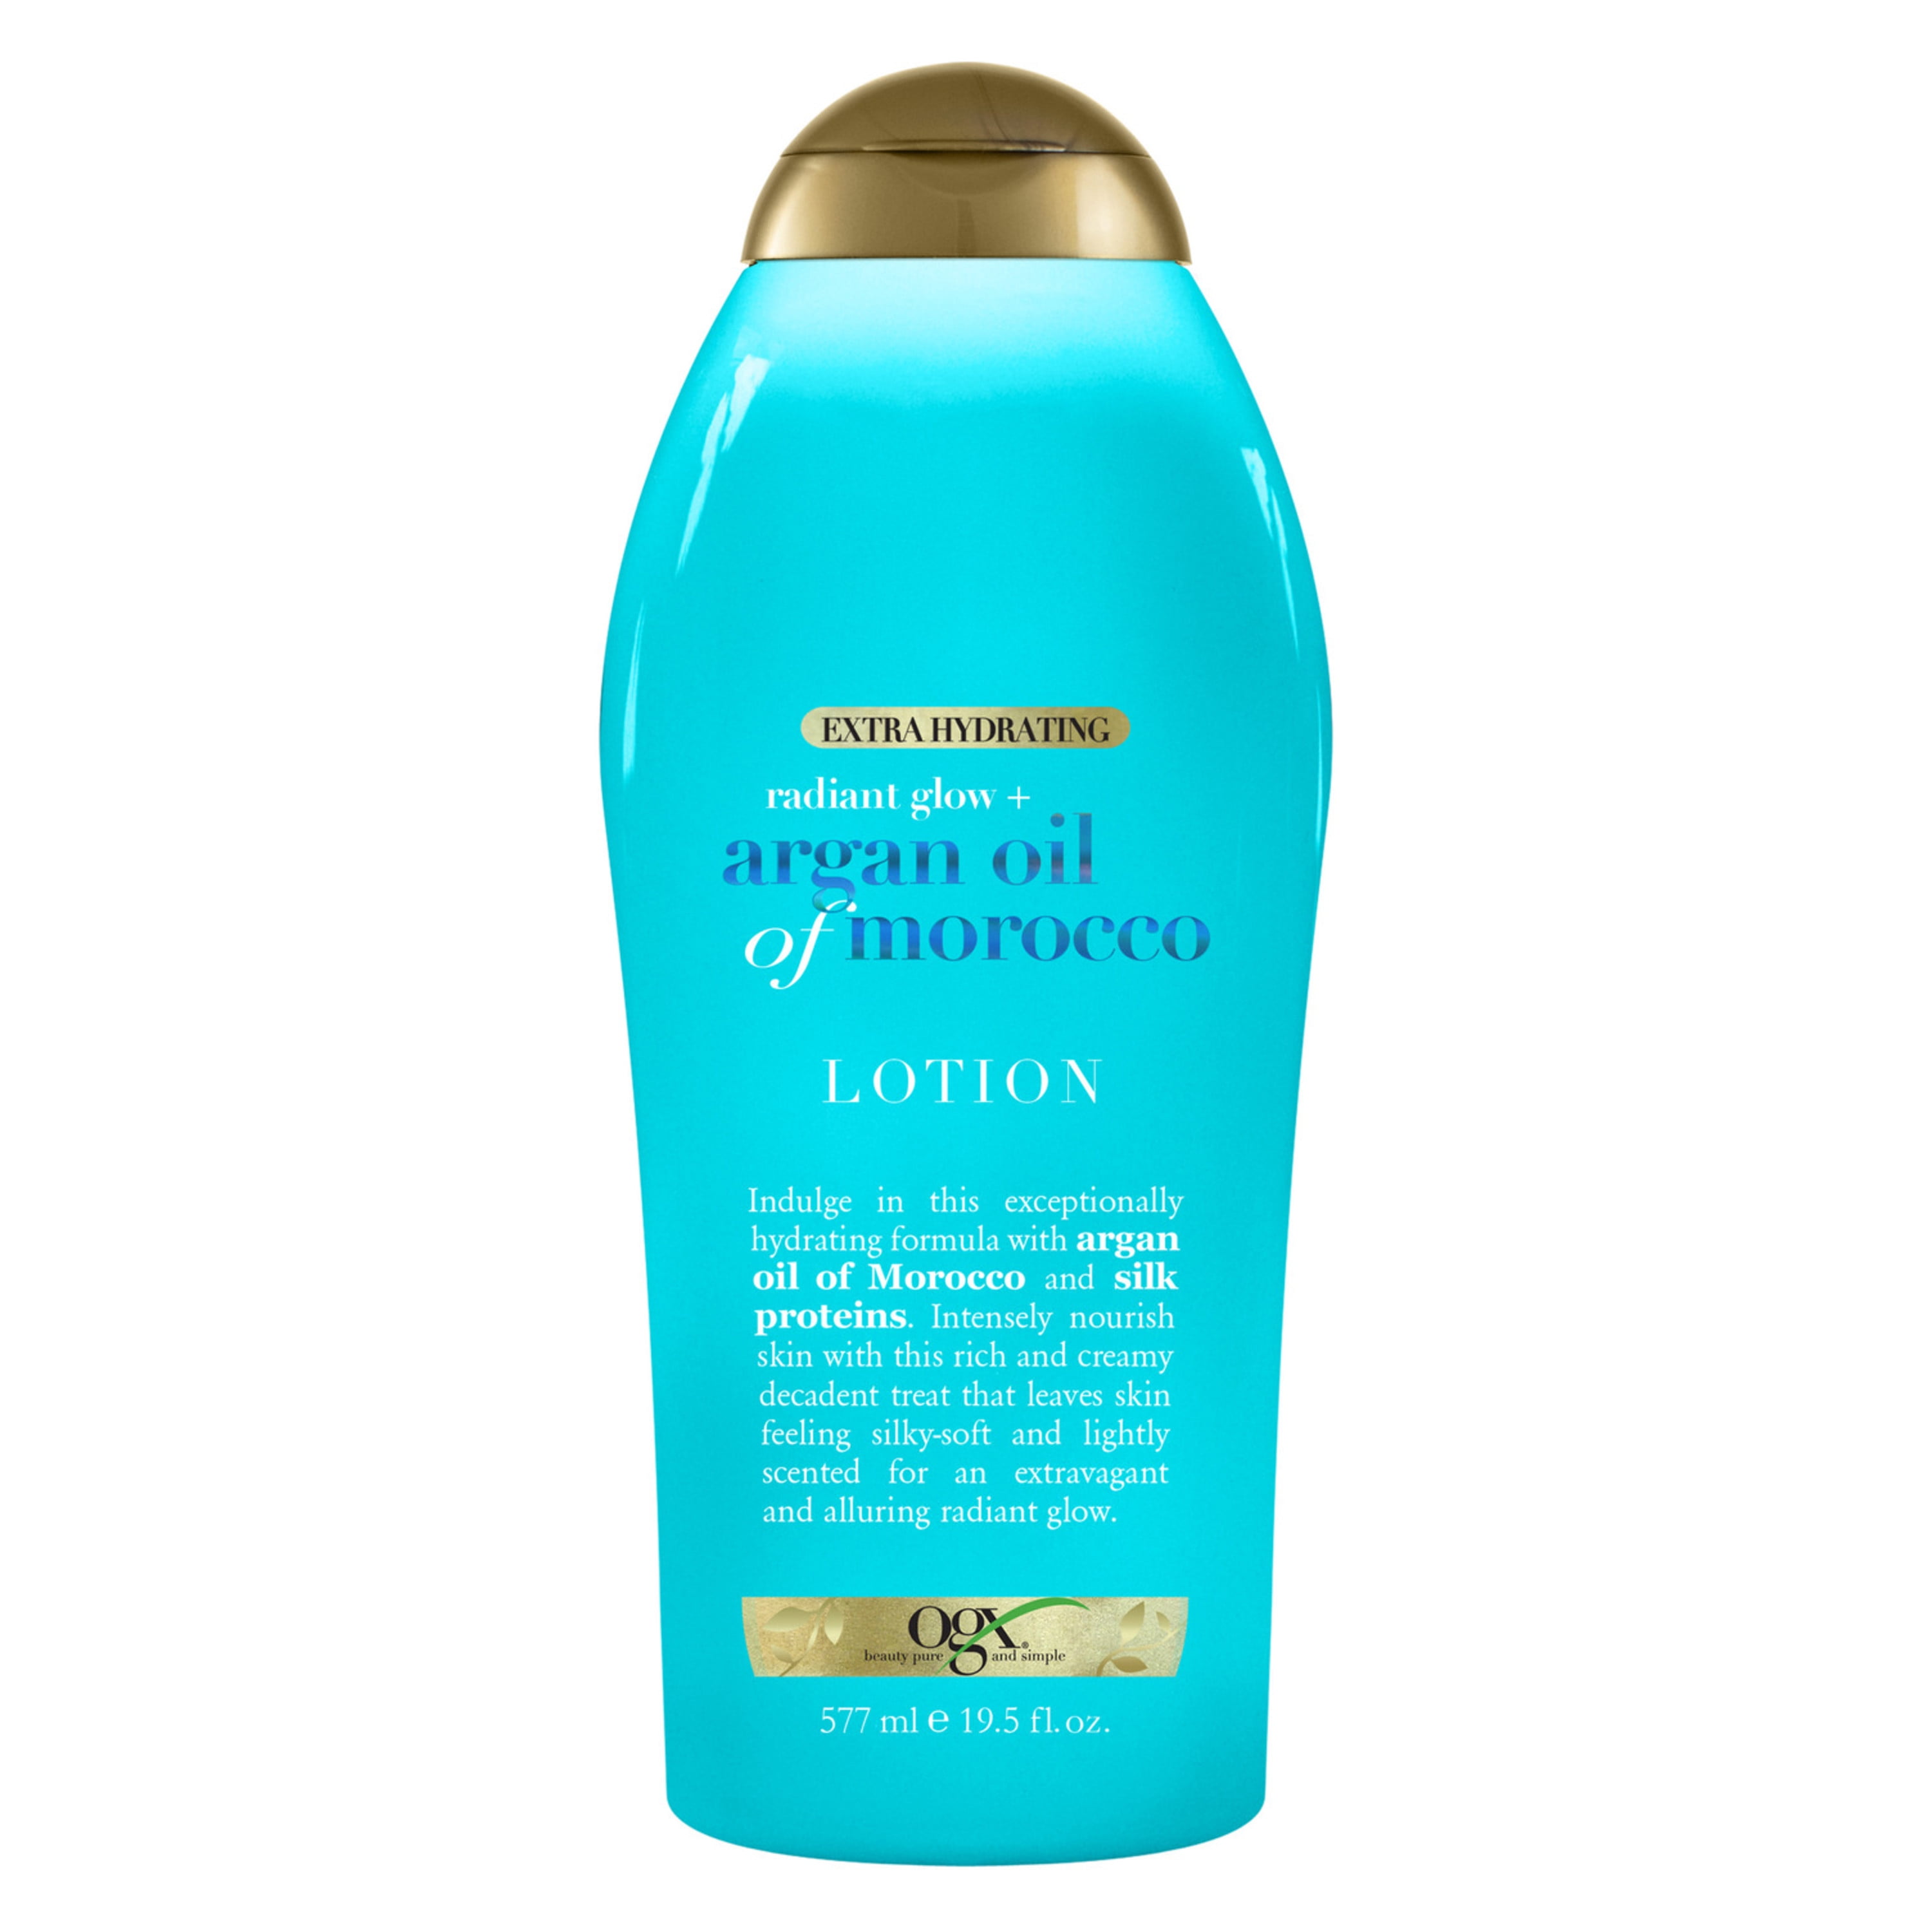 Aas speelplaats Versnel OGX Radiant Glow + Argan Oil of Morocco Extra Hydrating Body Lotion for Dry  Skin, Nourishing Creamy Body & Hand Cream for Silky Soft Skin,  Paraben-Free, Sulfated-Surfactants Free, 19.5 oz - Walmart.com